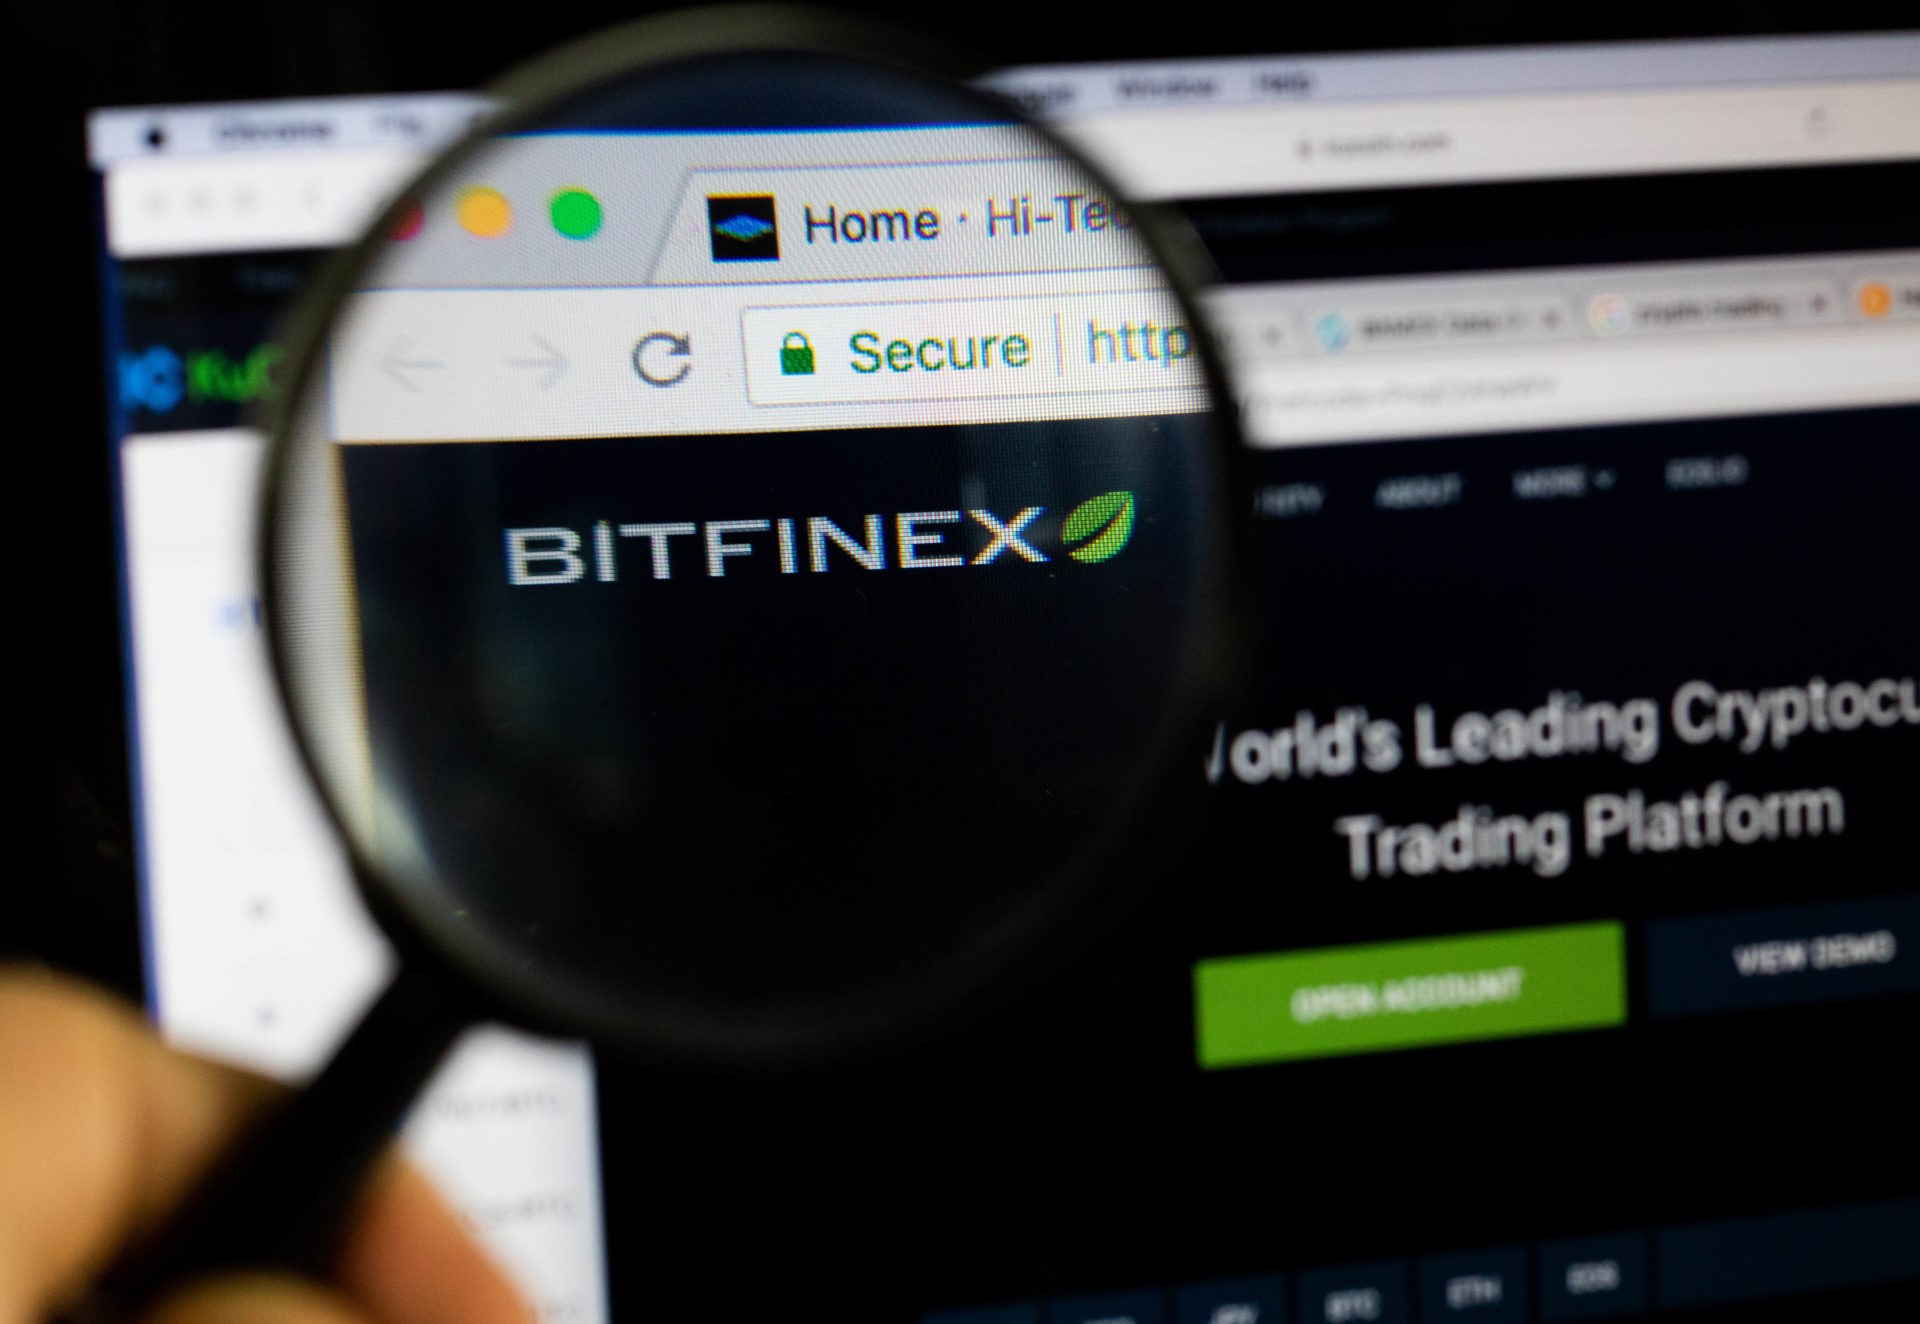 Breaking: Bitcoin Giant Bitfinex Sees Unexplained "Service Disruption" 10